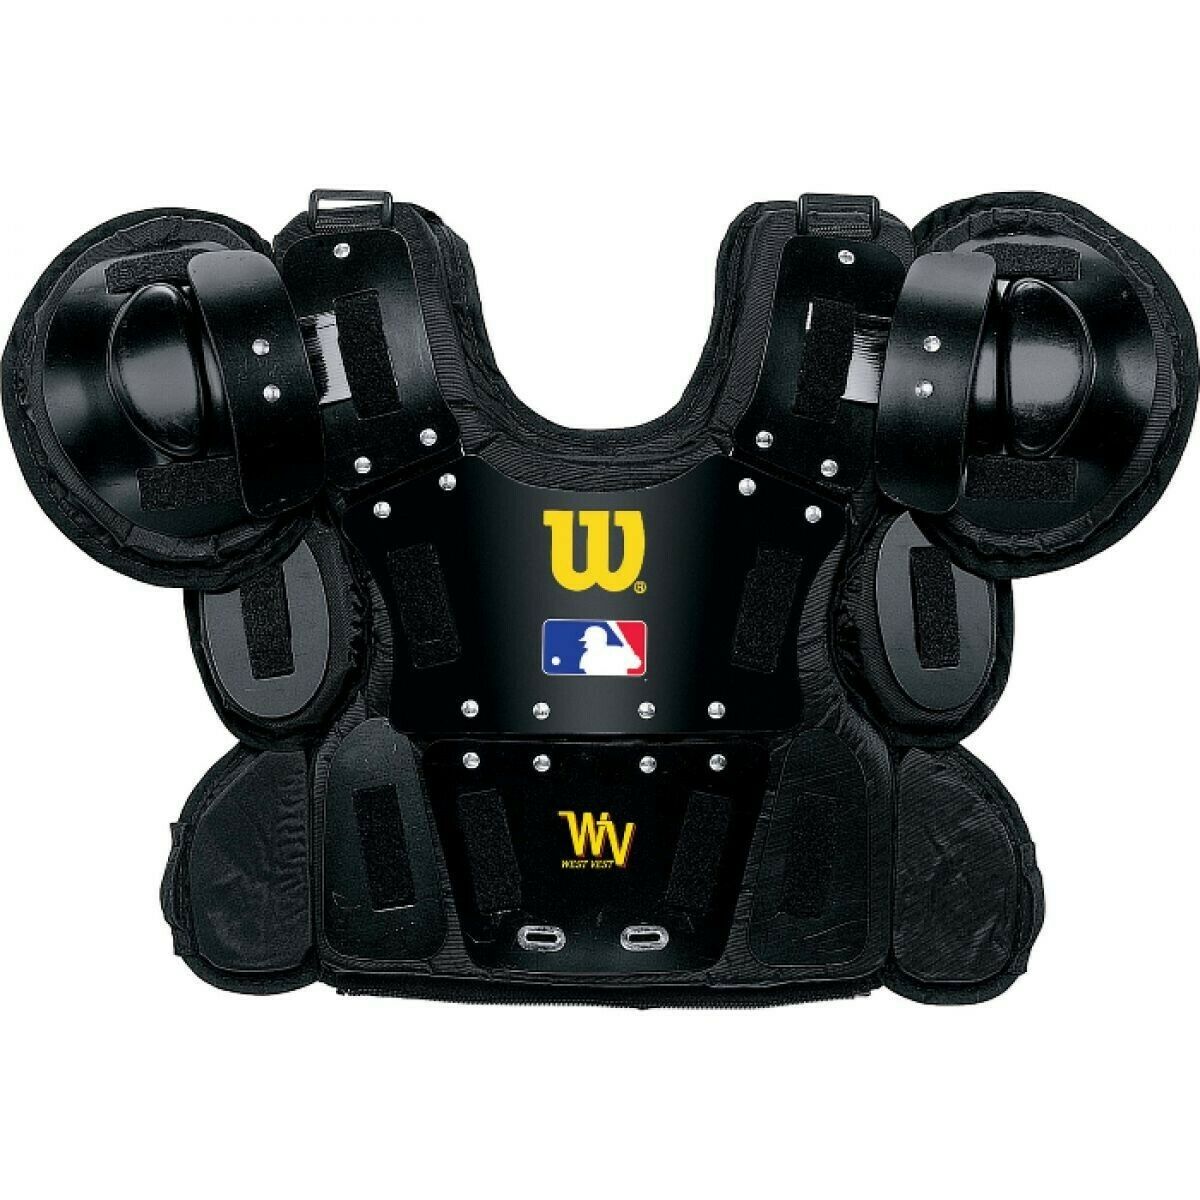 Wilson "west Vest" Pro Gold Umpire Chest Protector